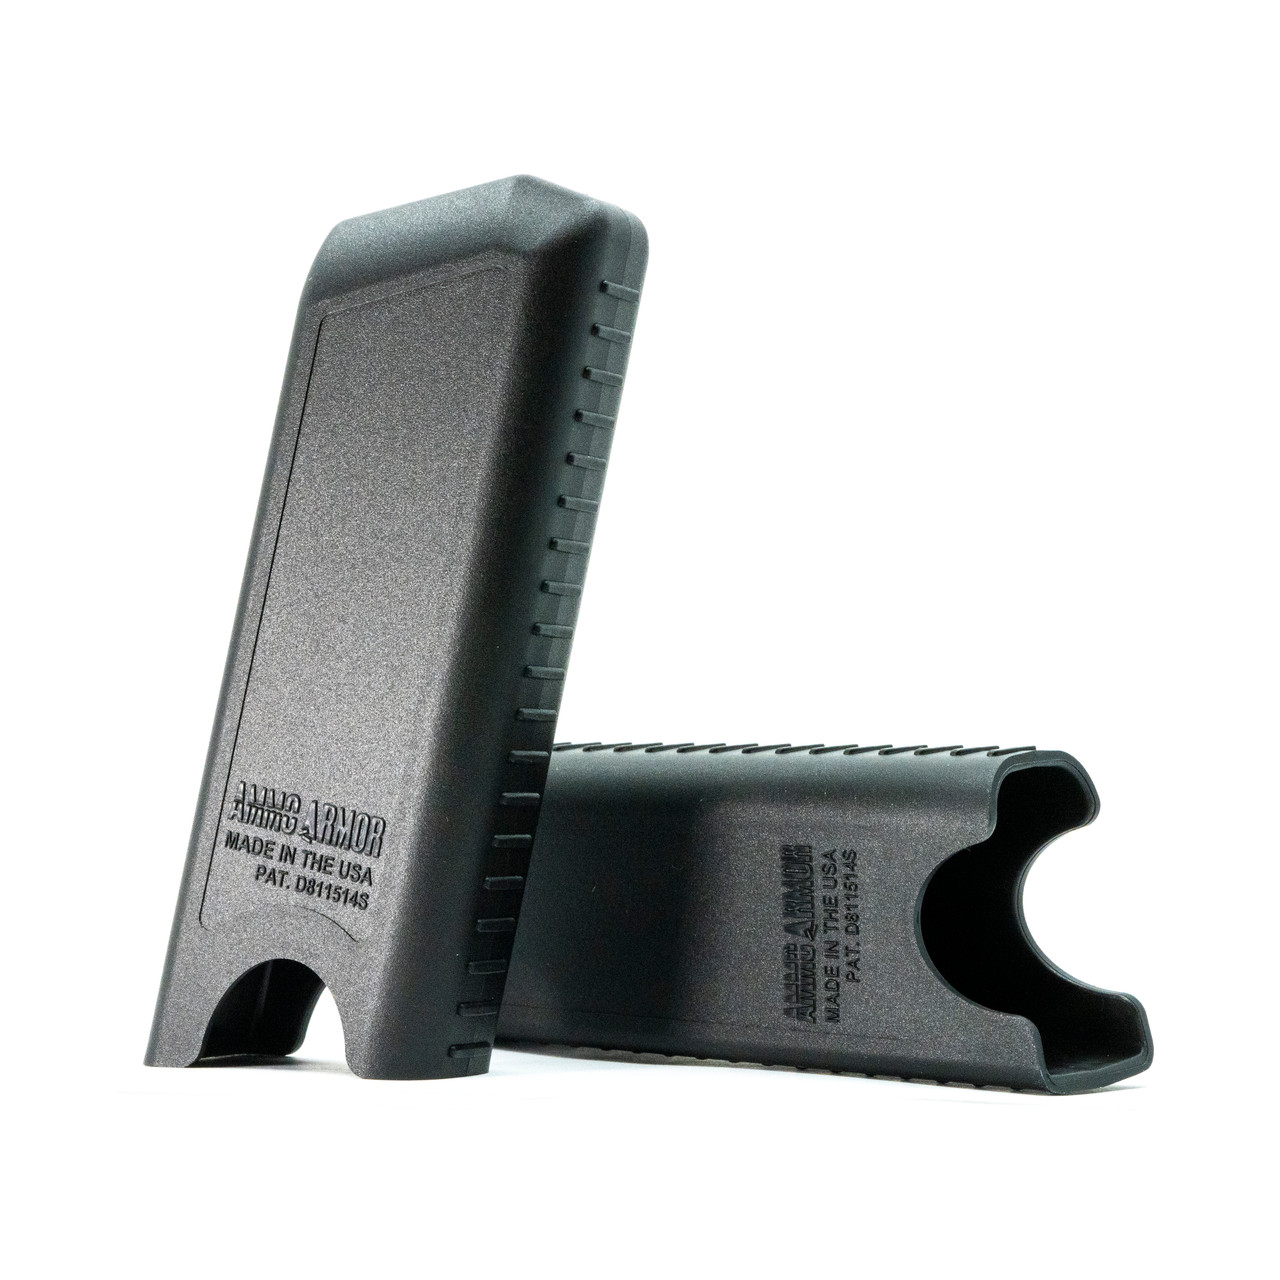 Magazine Cover for the Glock 22